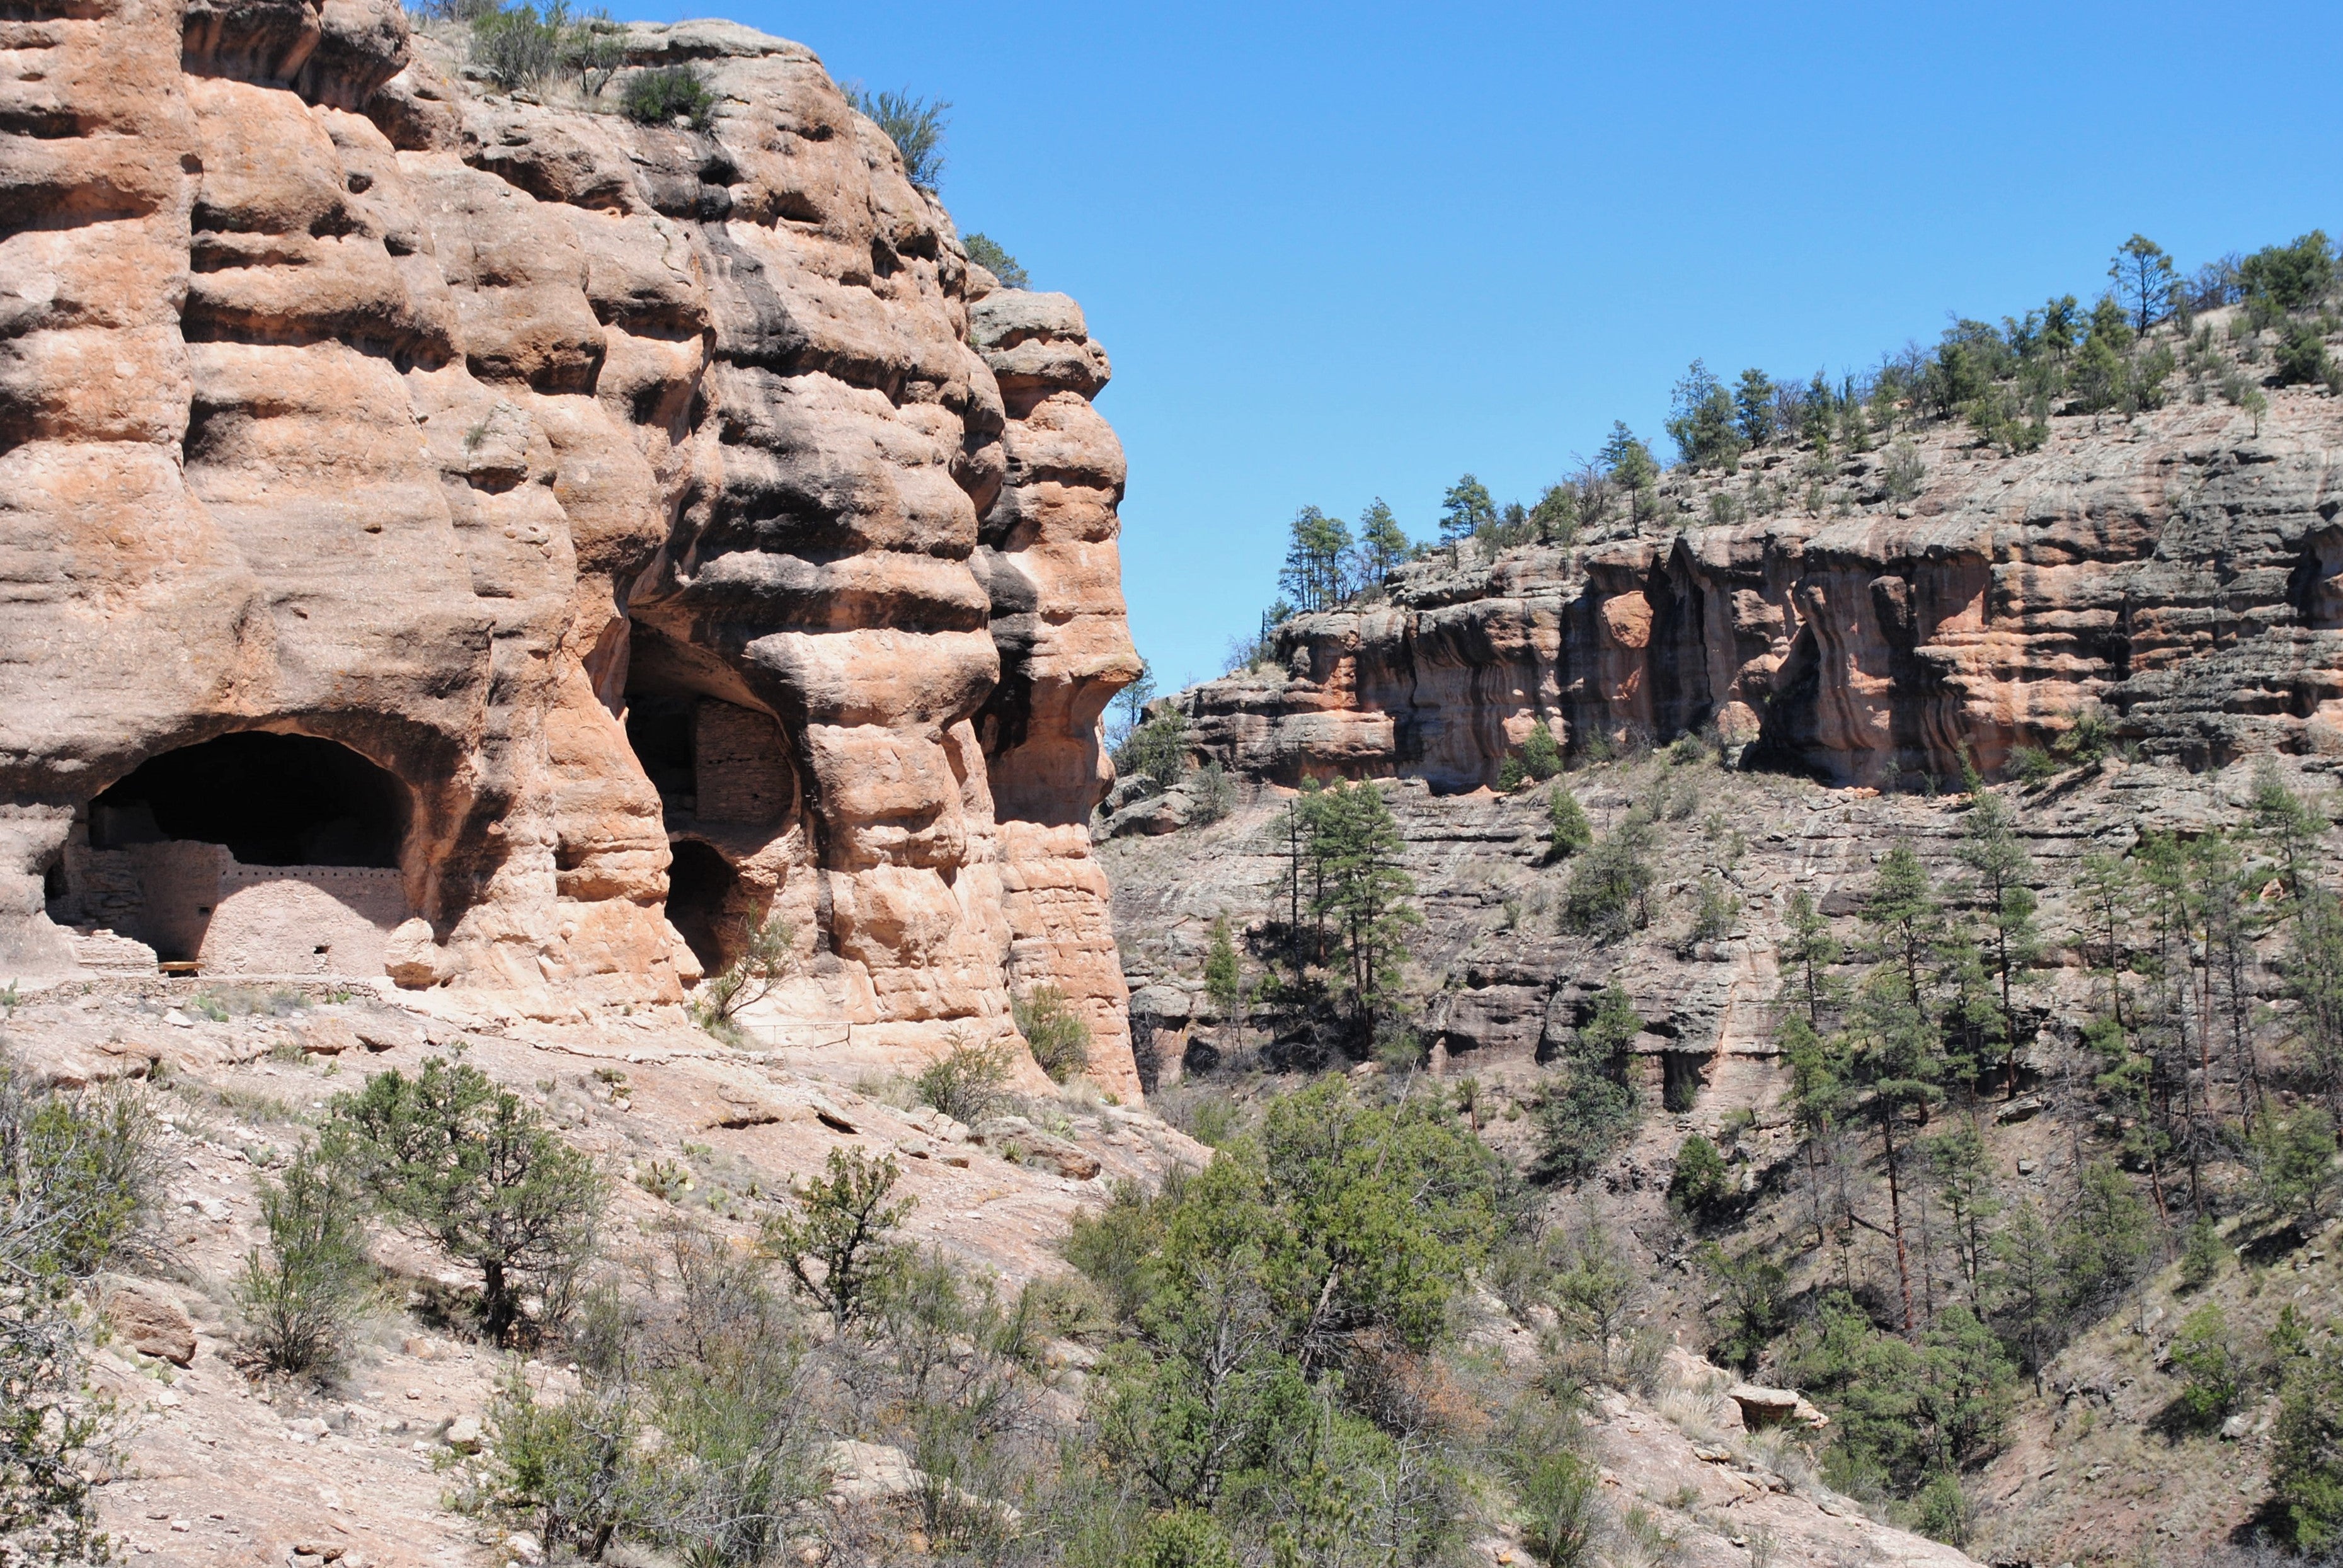 Great access to the Gila Cliff Dwellings